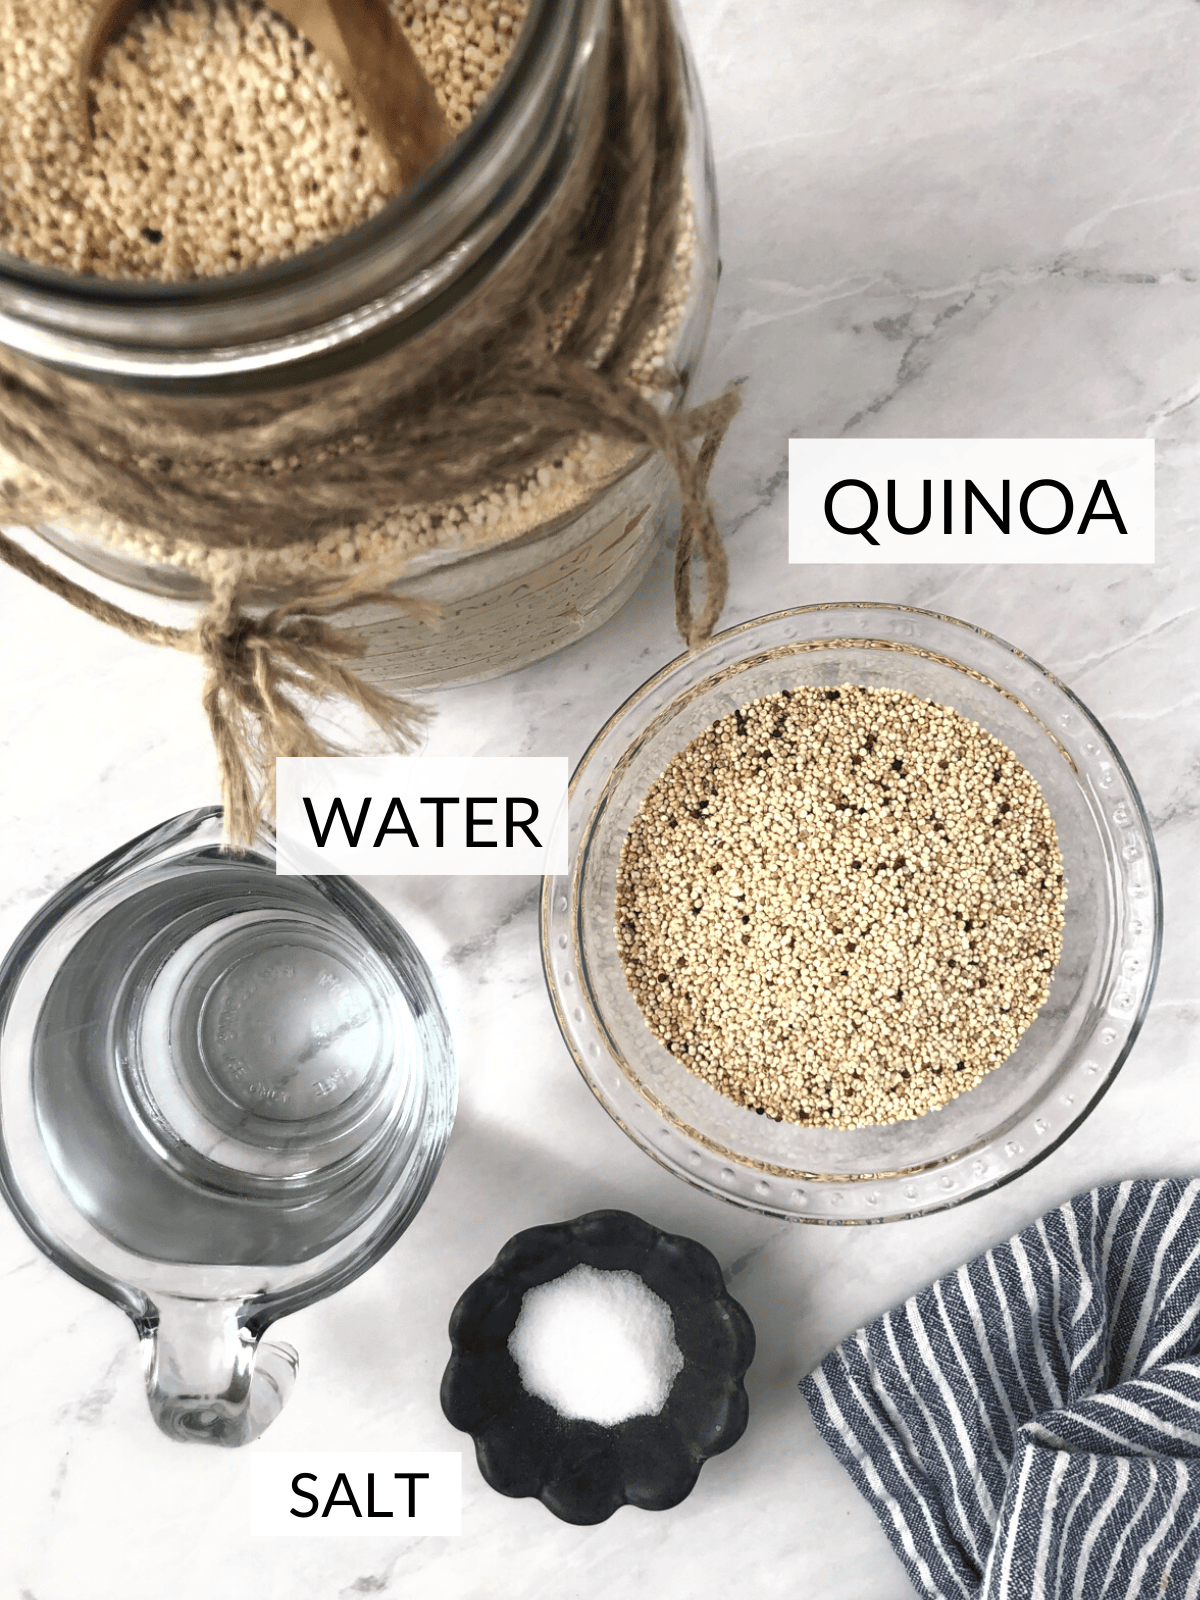 Ingredients for cooking quinoa.